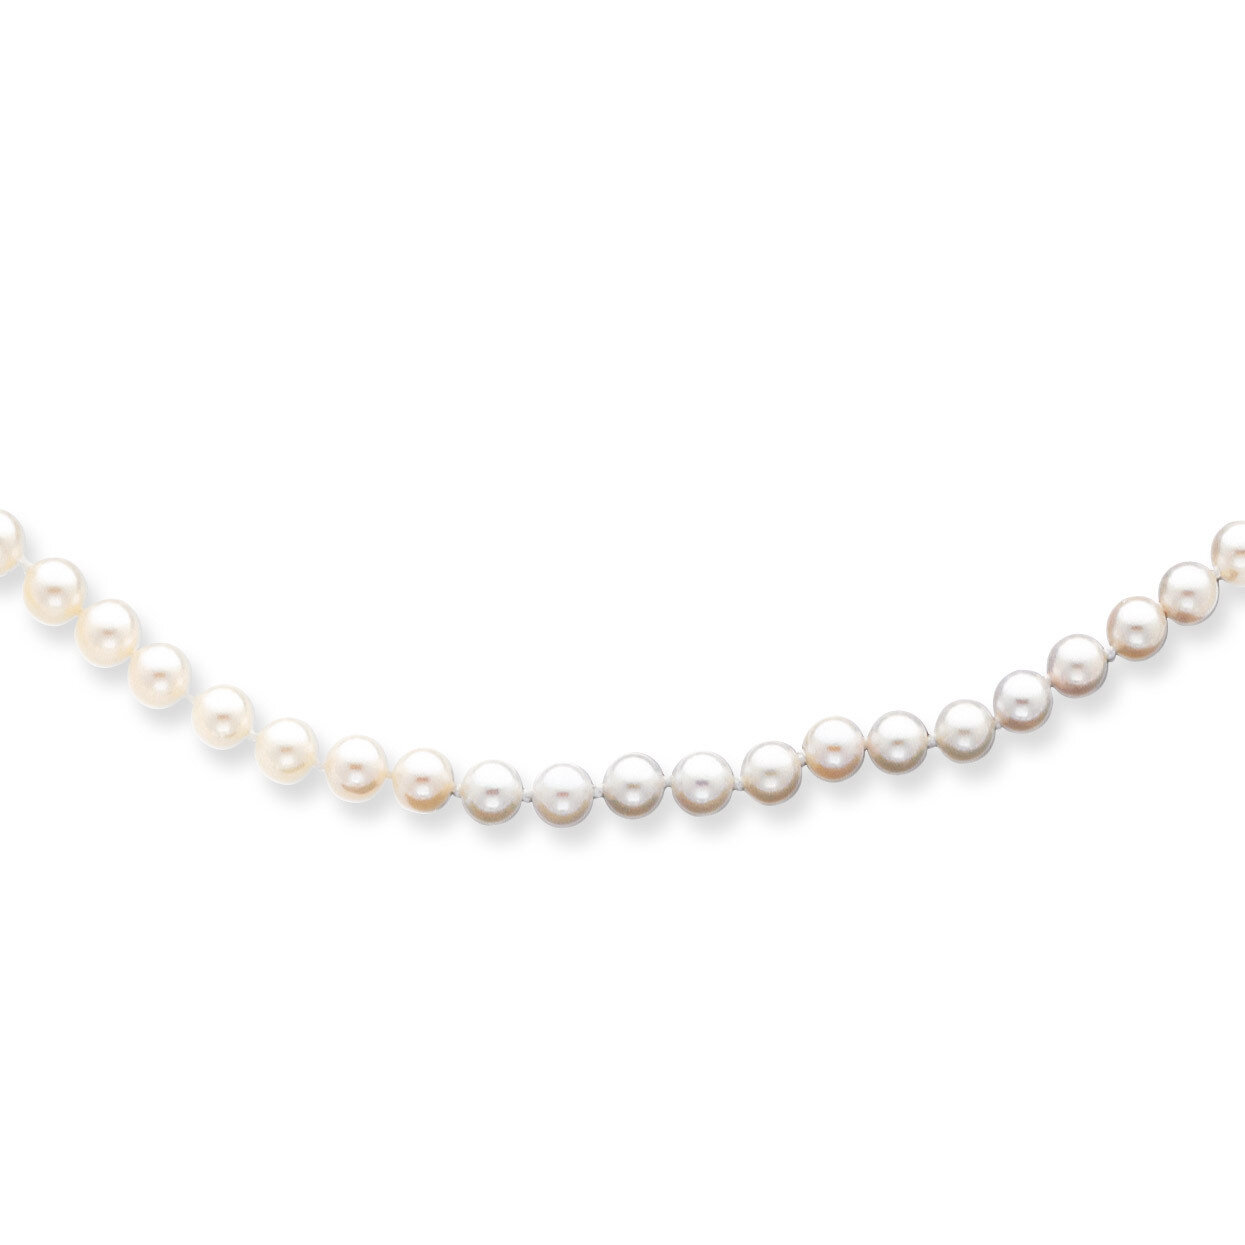 5-6mm Round White Saltwater Akoya Cultured Pearl Bracelet 7 Inch 14k Gold PL50A-7